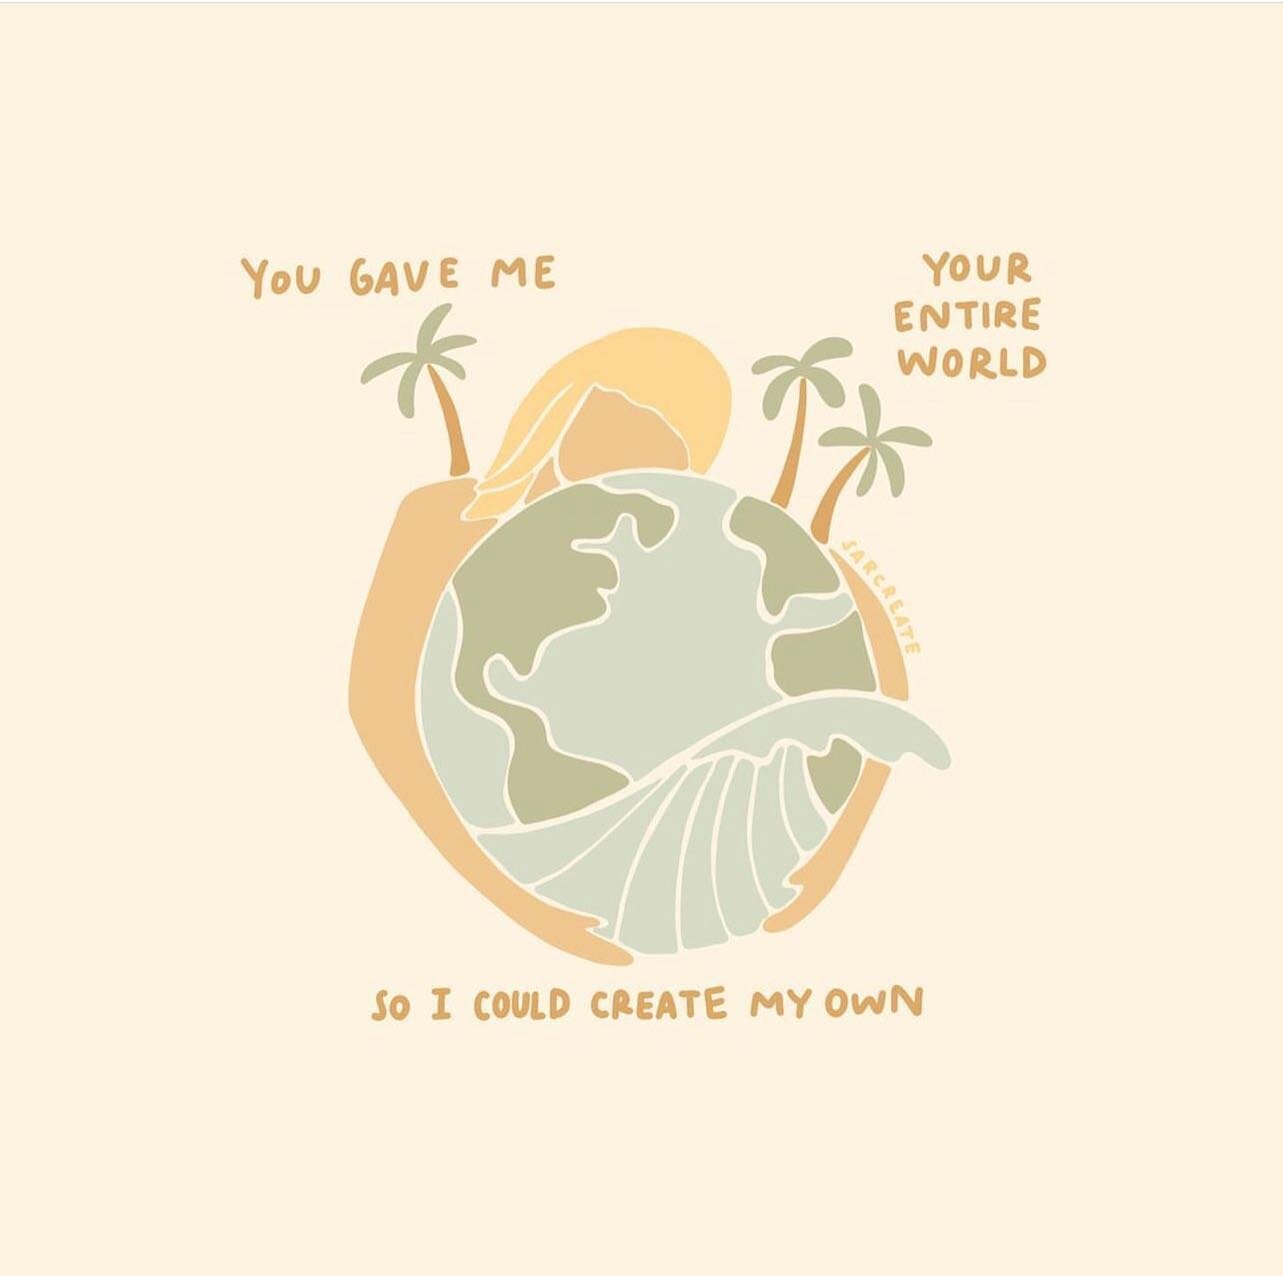 It&rsquo;s no secret that we LOVE @sarcreate and her beautiful art. 

Couldn&rsquo;t help sharing this one in celebration of Mother&rsquo;s Day 🌼

Happy Mother&rsquo;s Day to all mamas, angel baby mamas, mama type figures and anyone who has a part i